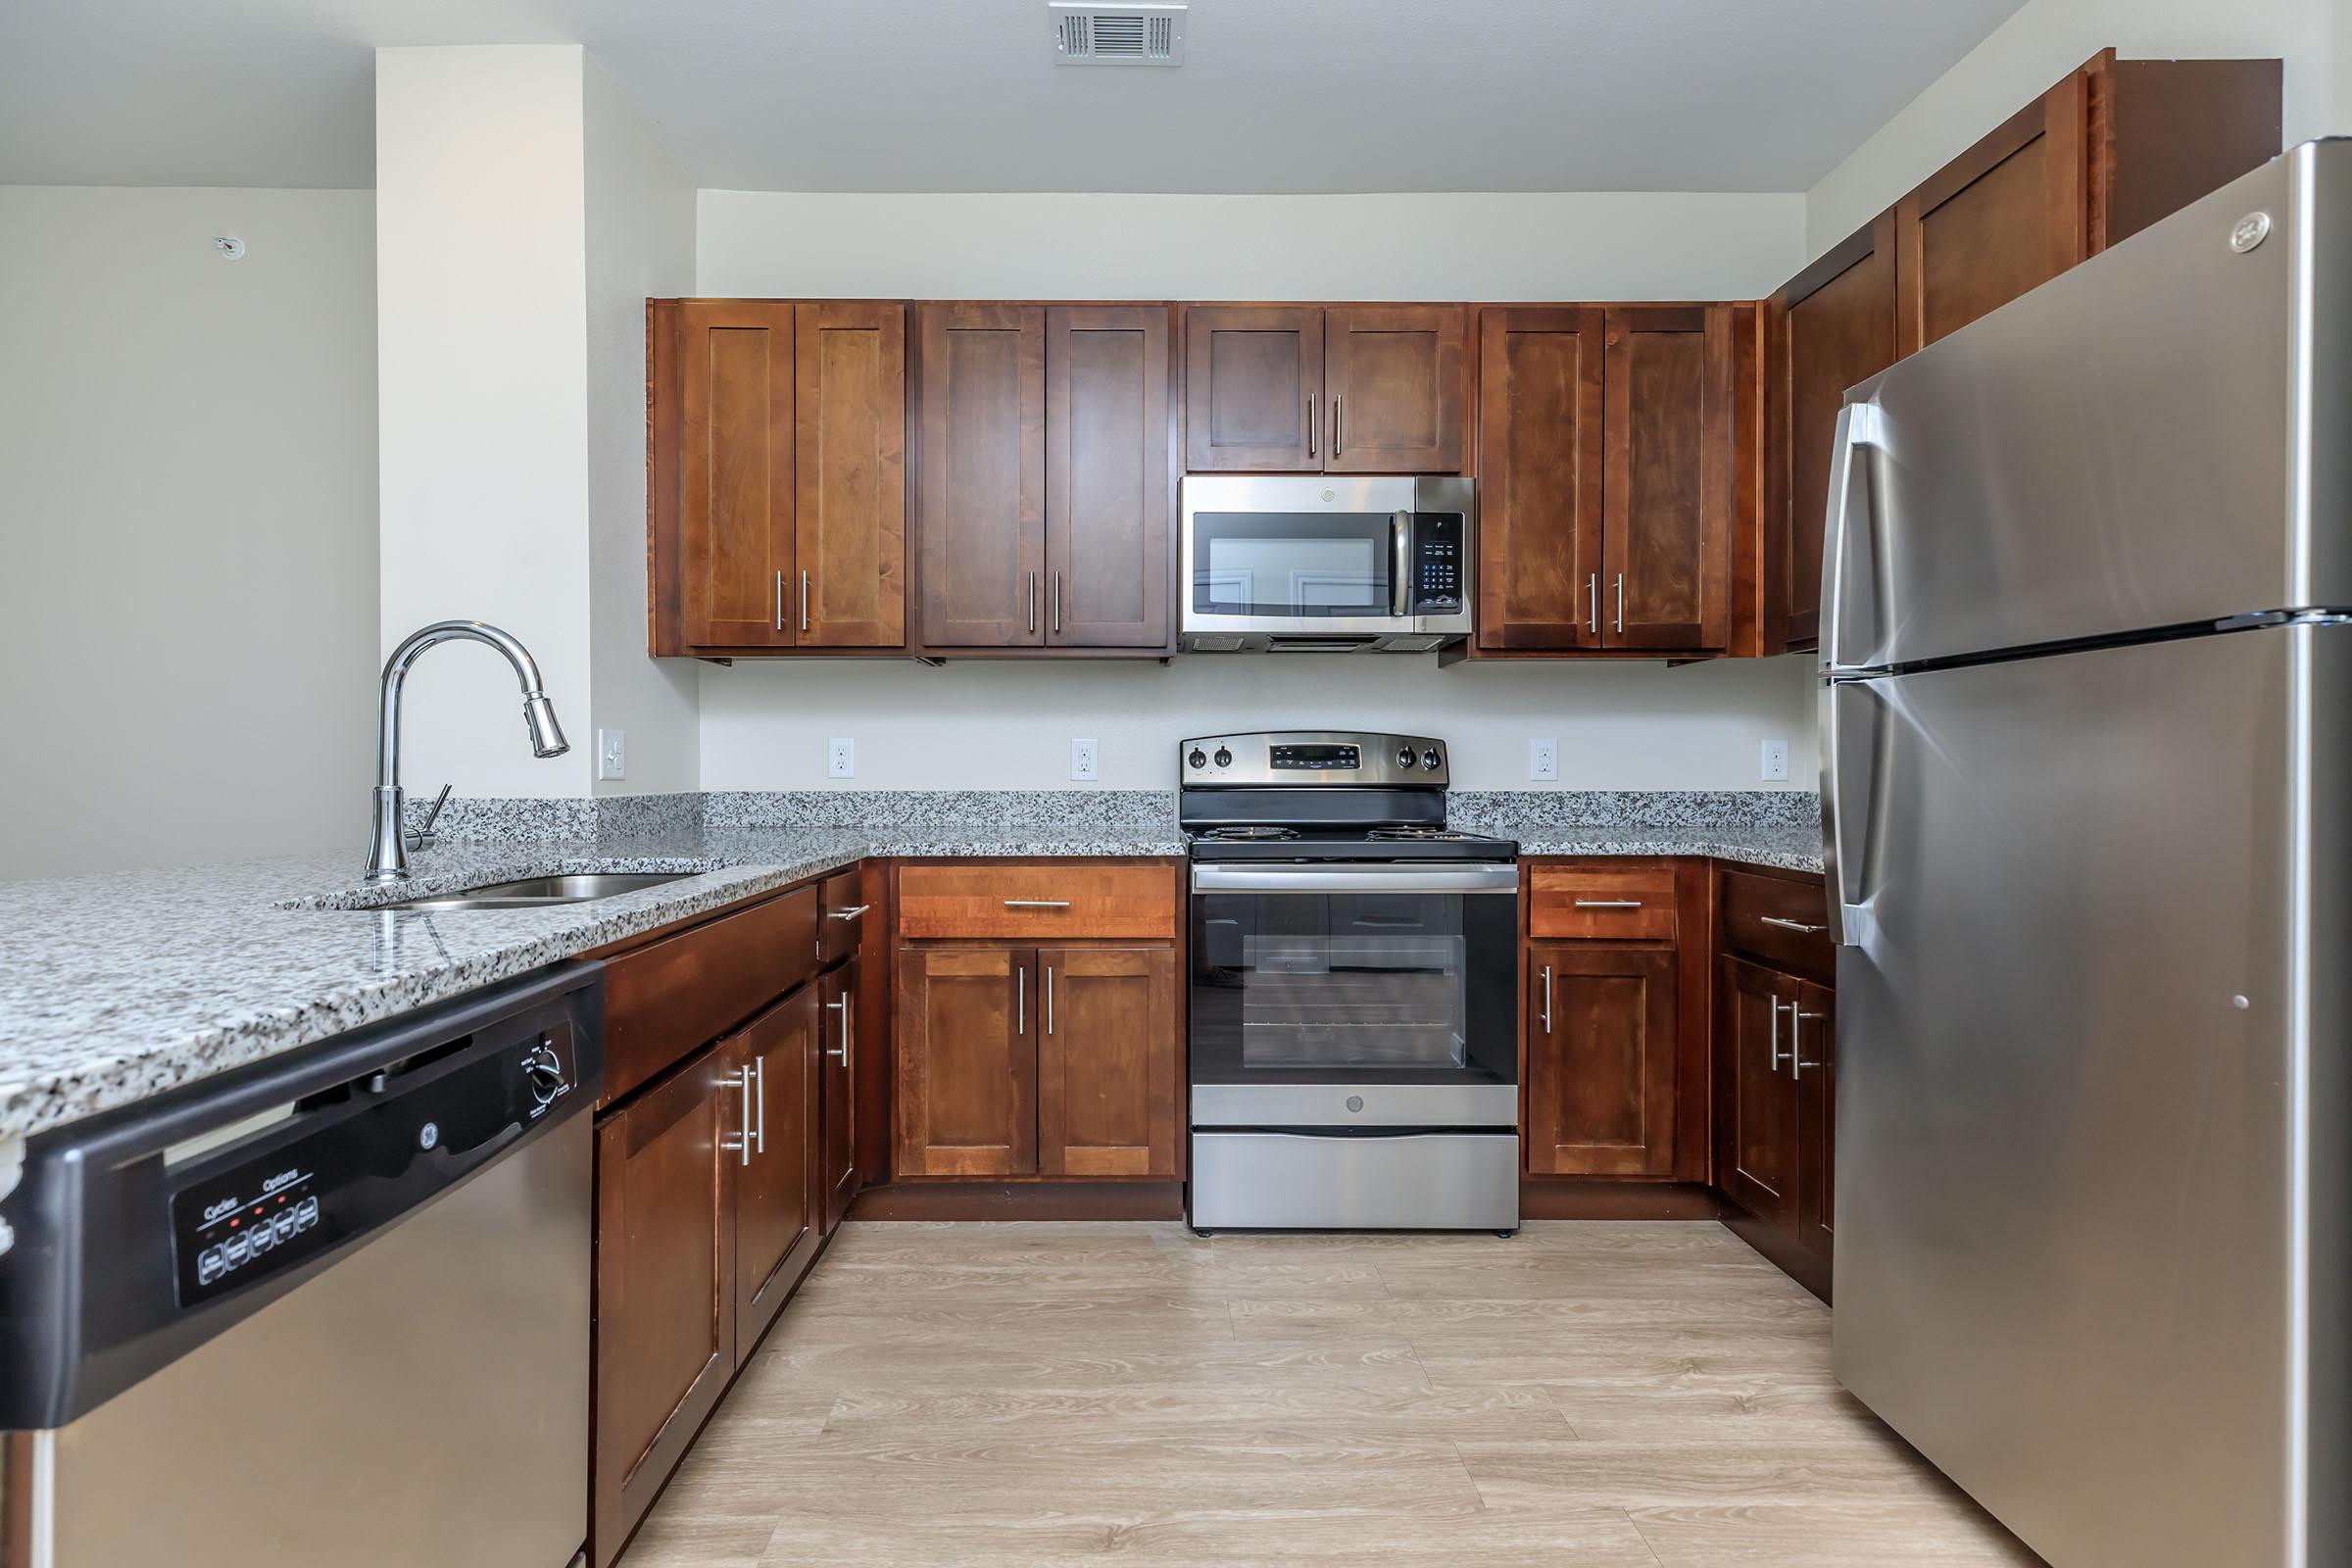 Pflugerville TX Senior Apartments - Legacy Ranch at Dessau East - Kitchen with Stainless Steel Appliances and Wood Cabinetry